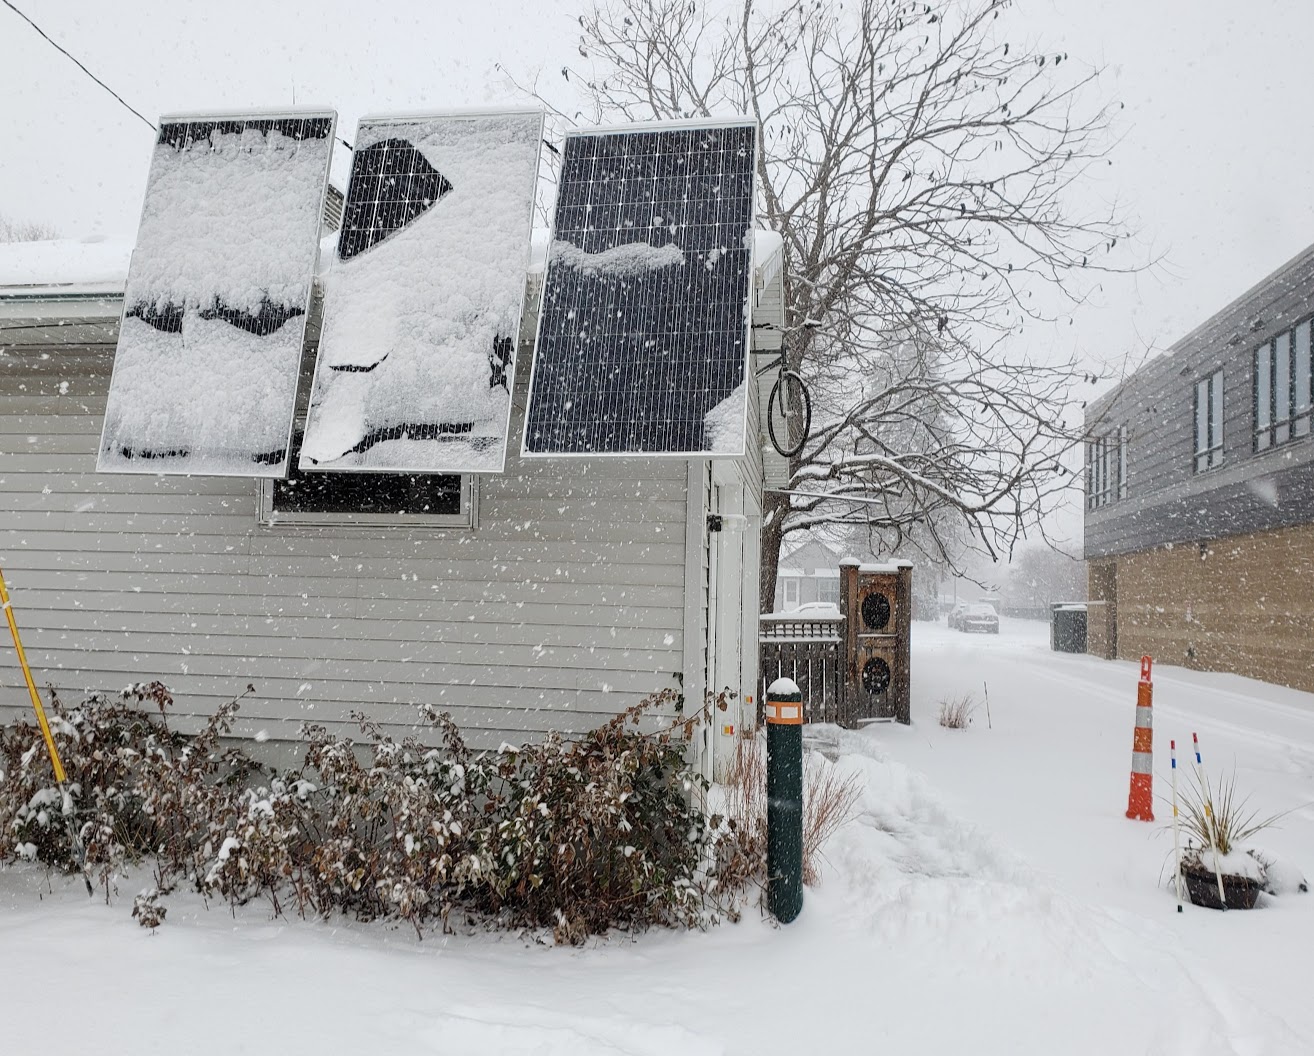 solar_panels_10x_3_panels_up_in_the_snow_photo